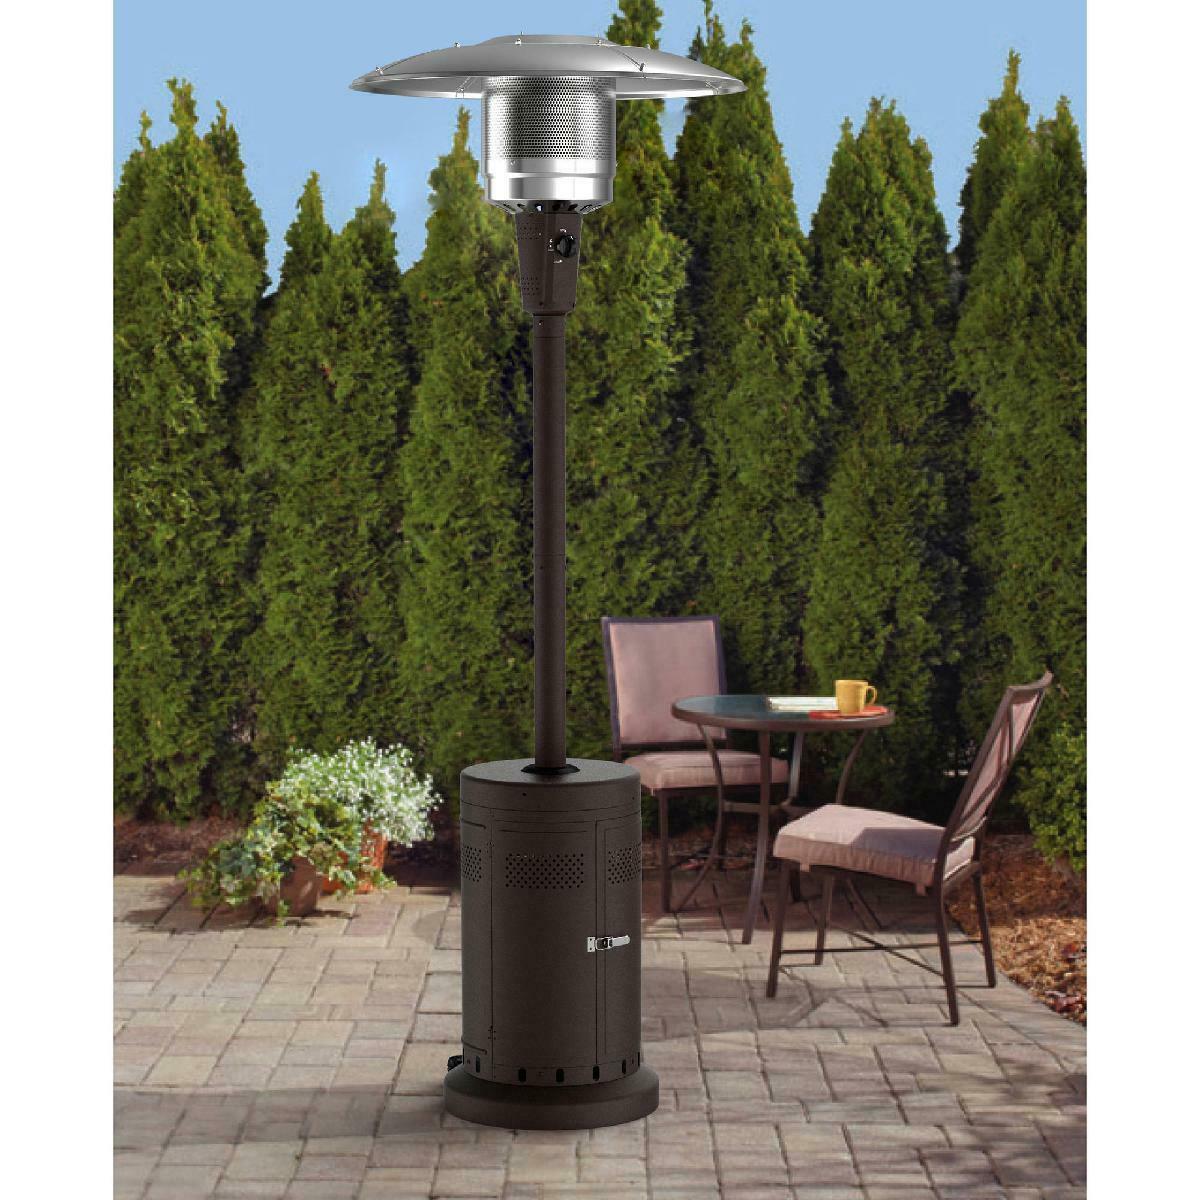 Outdoor Patio Heater 40,000 BTU Large Portable Tower Heater Oscillating W Wheels - Large Outdoor Patio Heater - Outdoor Propane Patio Heater with Wheels